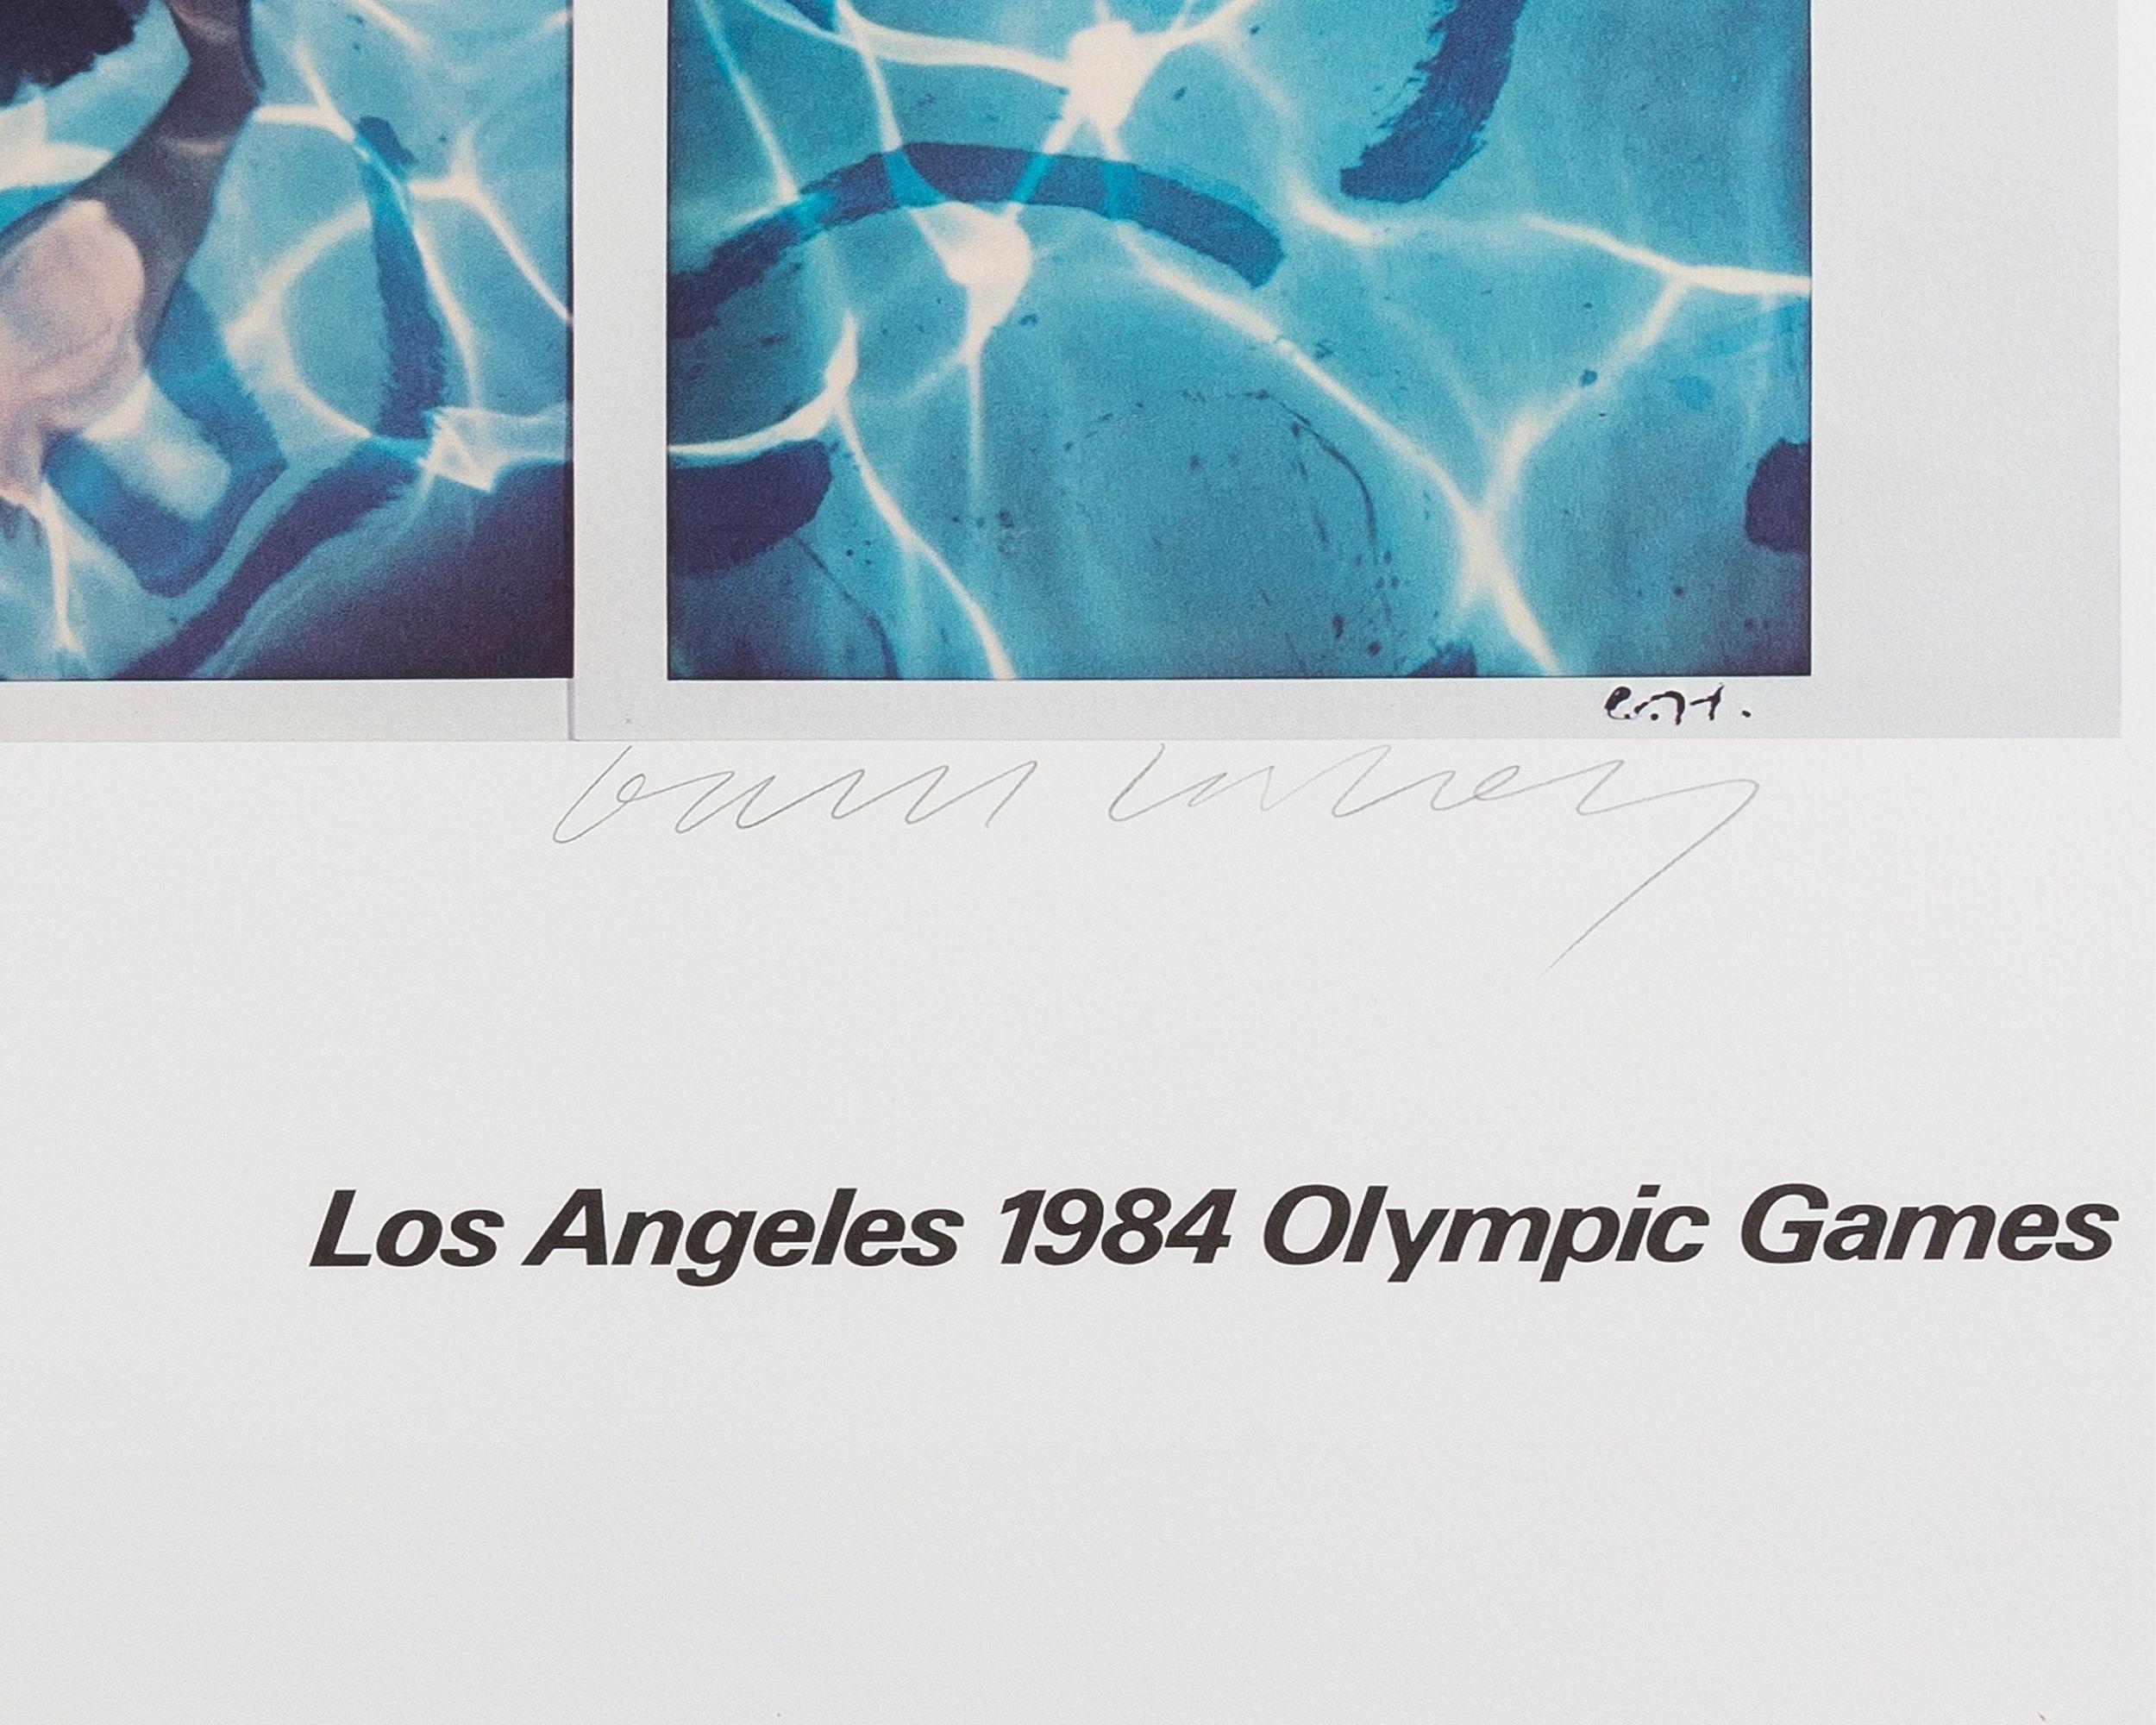 Los Angeles 1984 Olympic Games -- Lithograph, Swimming Pool by David Hockney 1